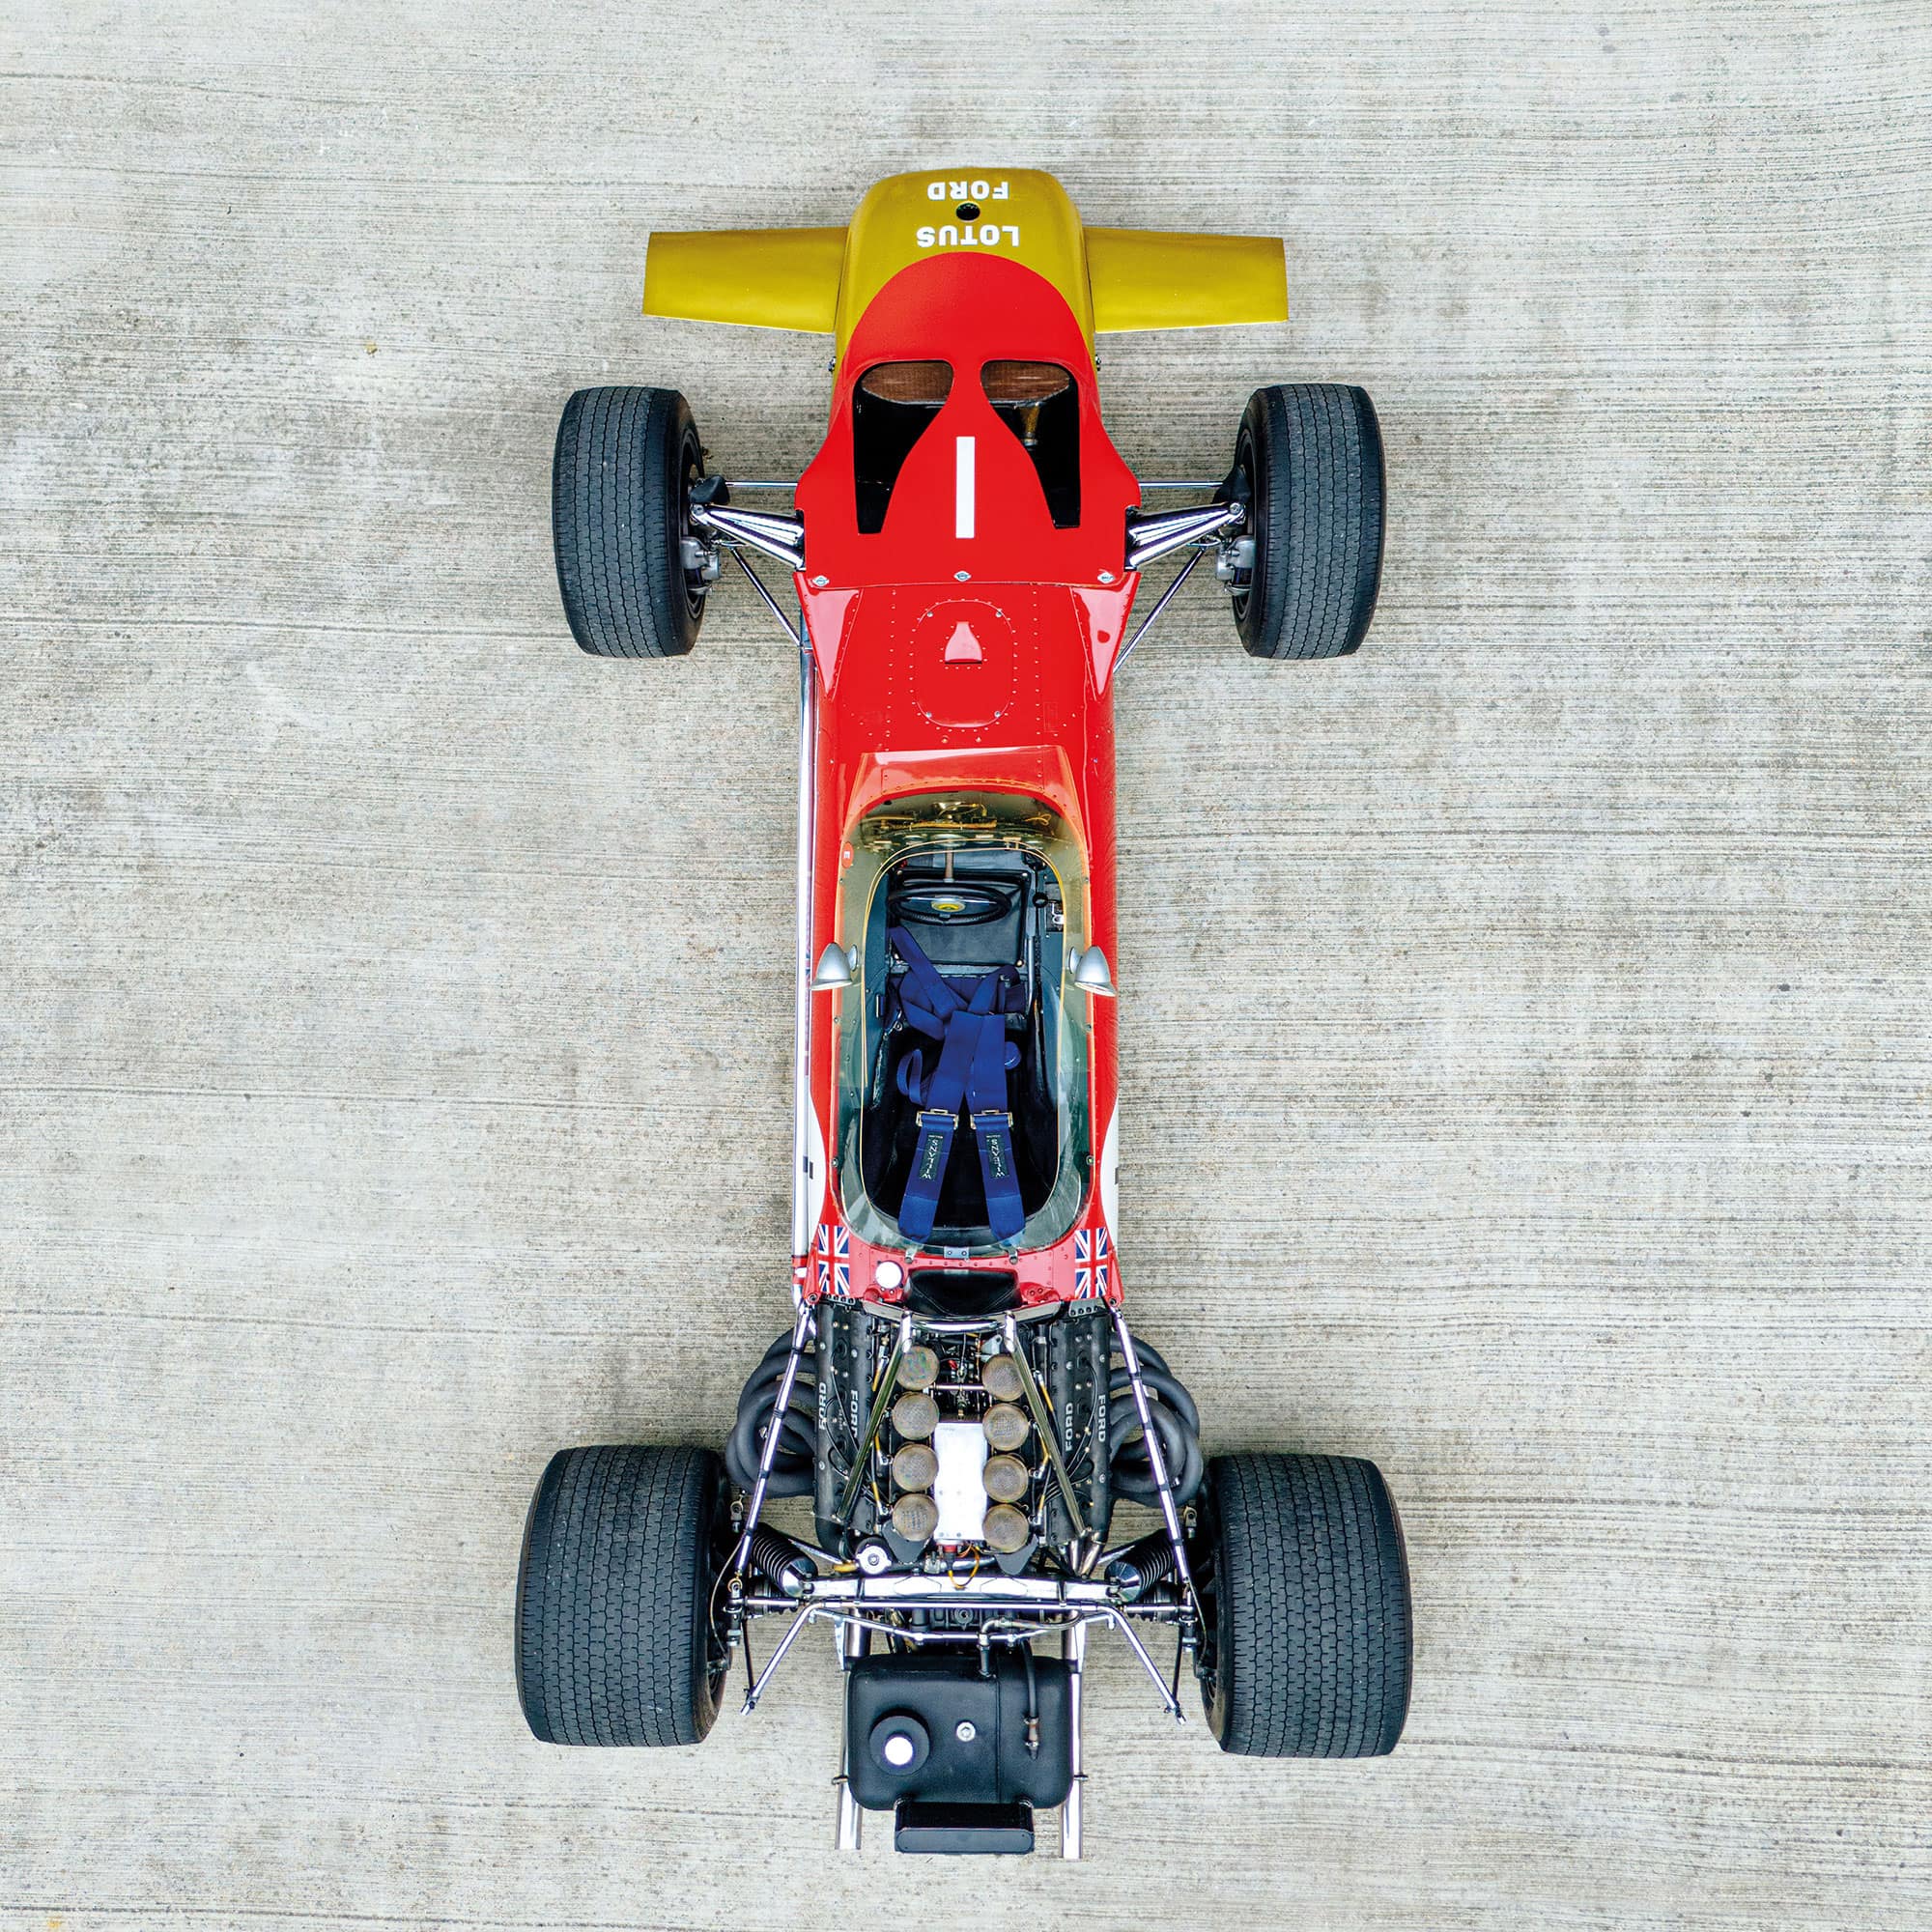 Lotus-49-from-above-Race-Car-of-the-Century